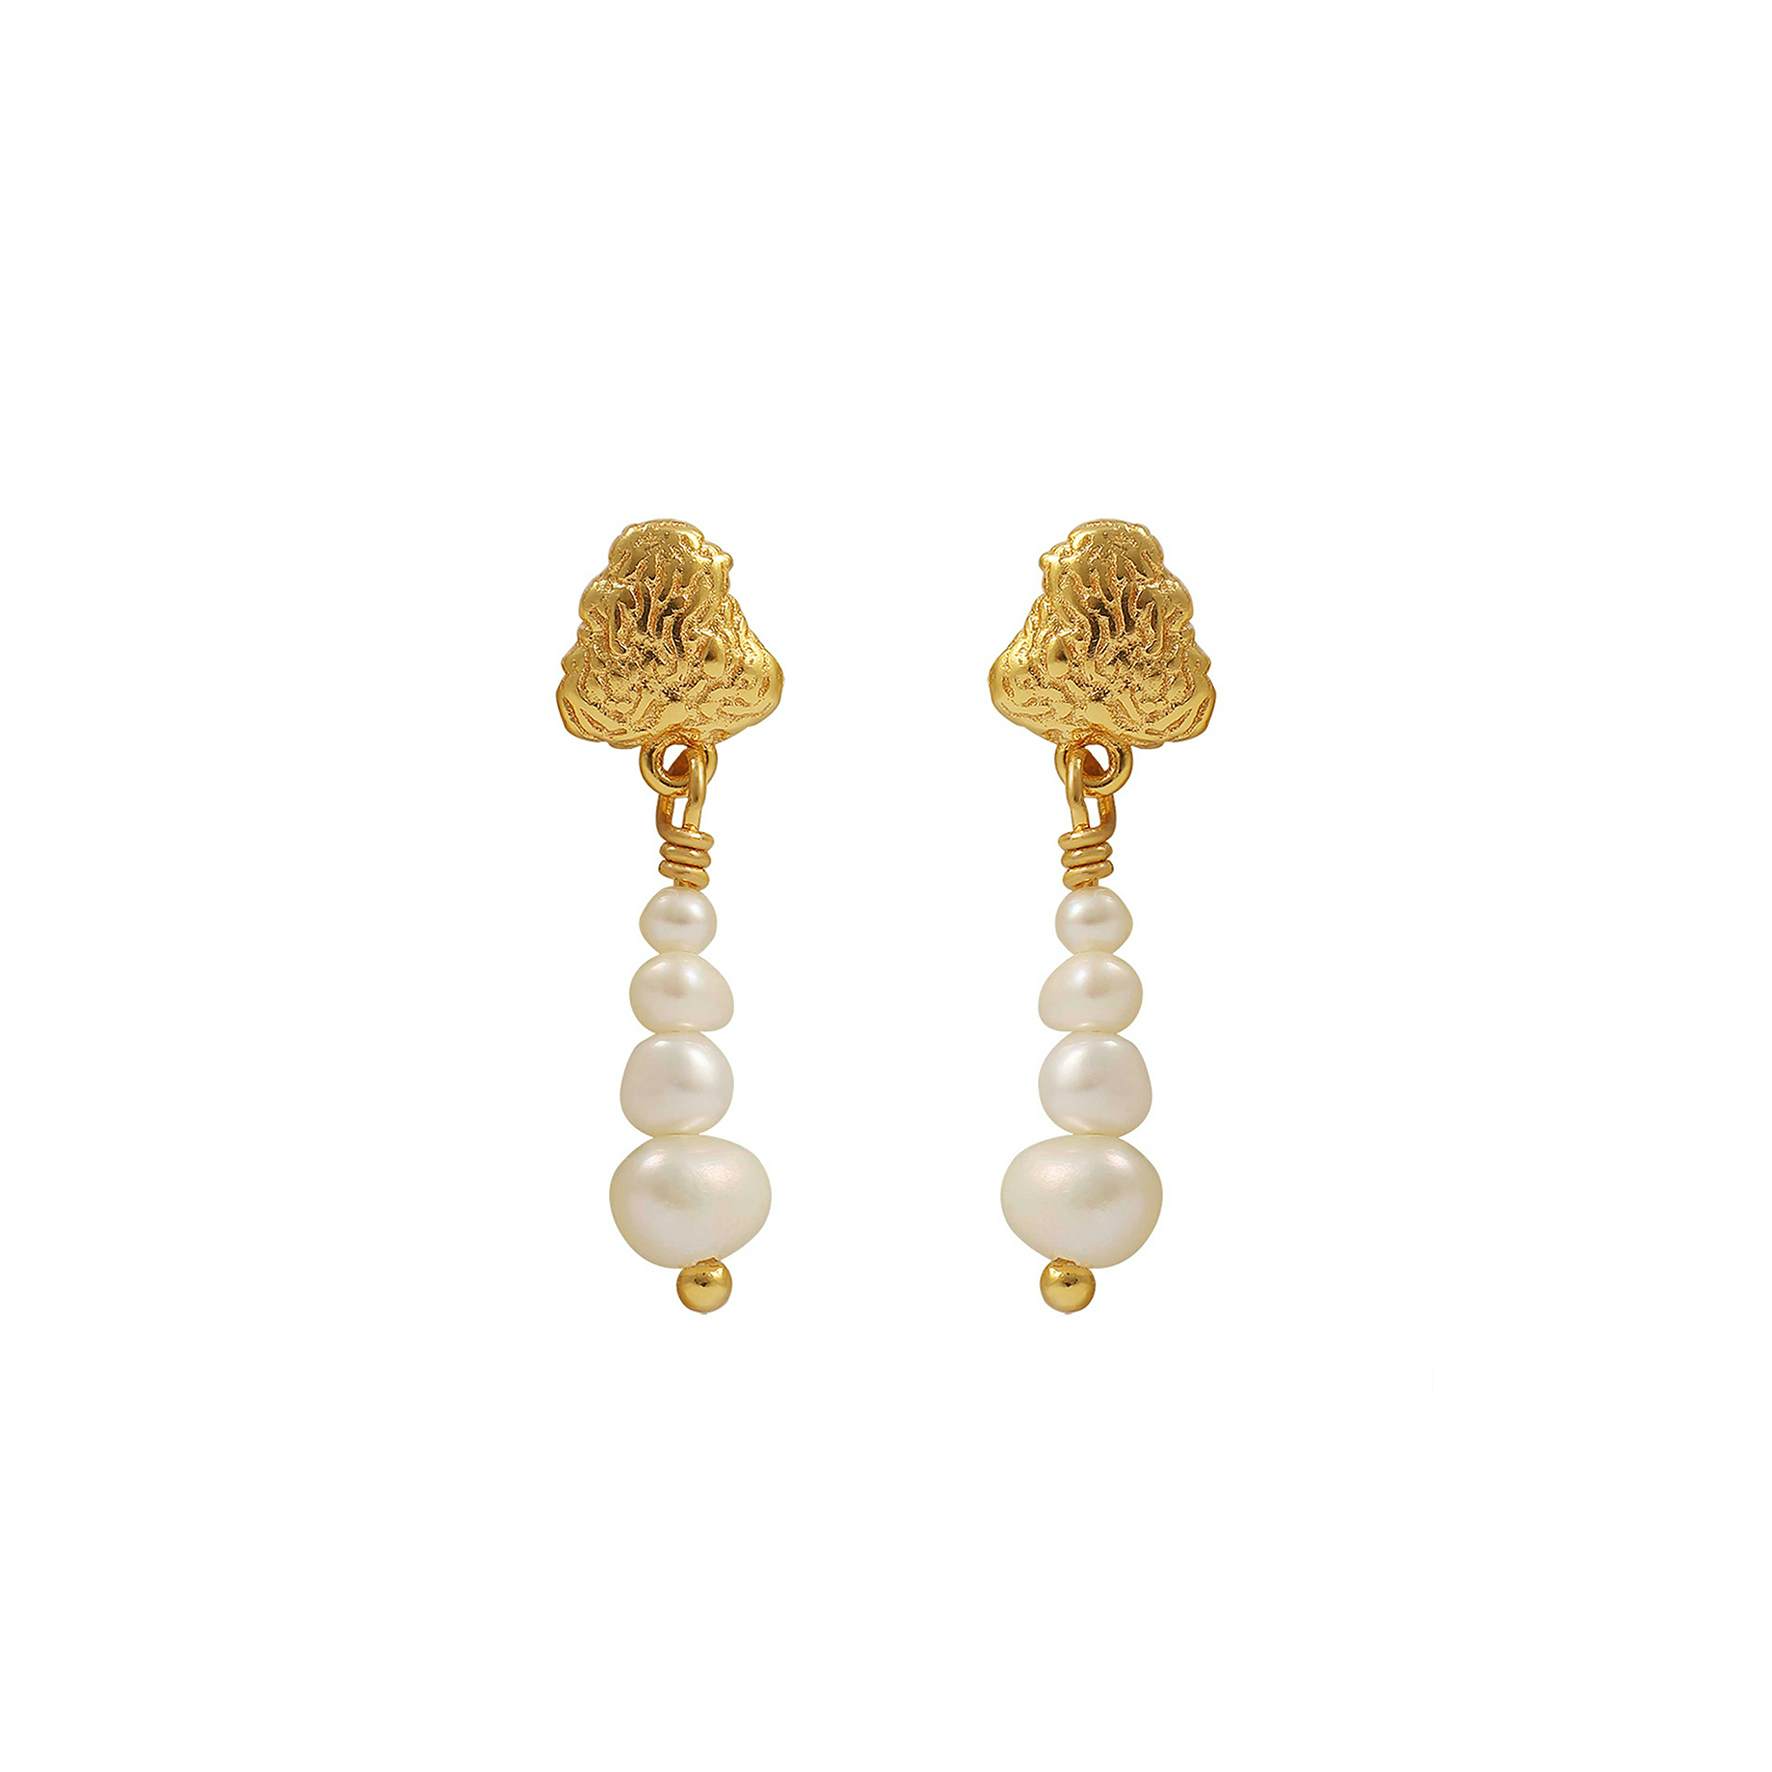 Coralie White Earrings from Hultquist Copenhagen in Goldplated-Silver Sterling 925